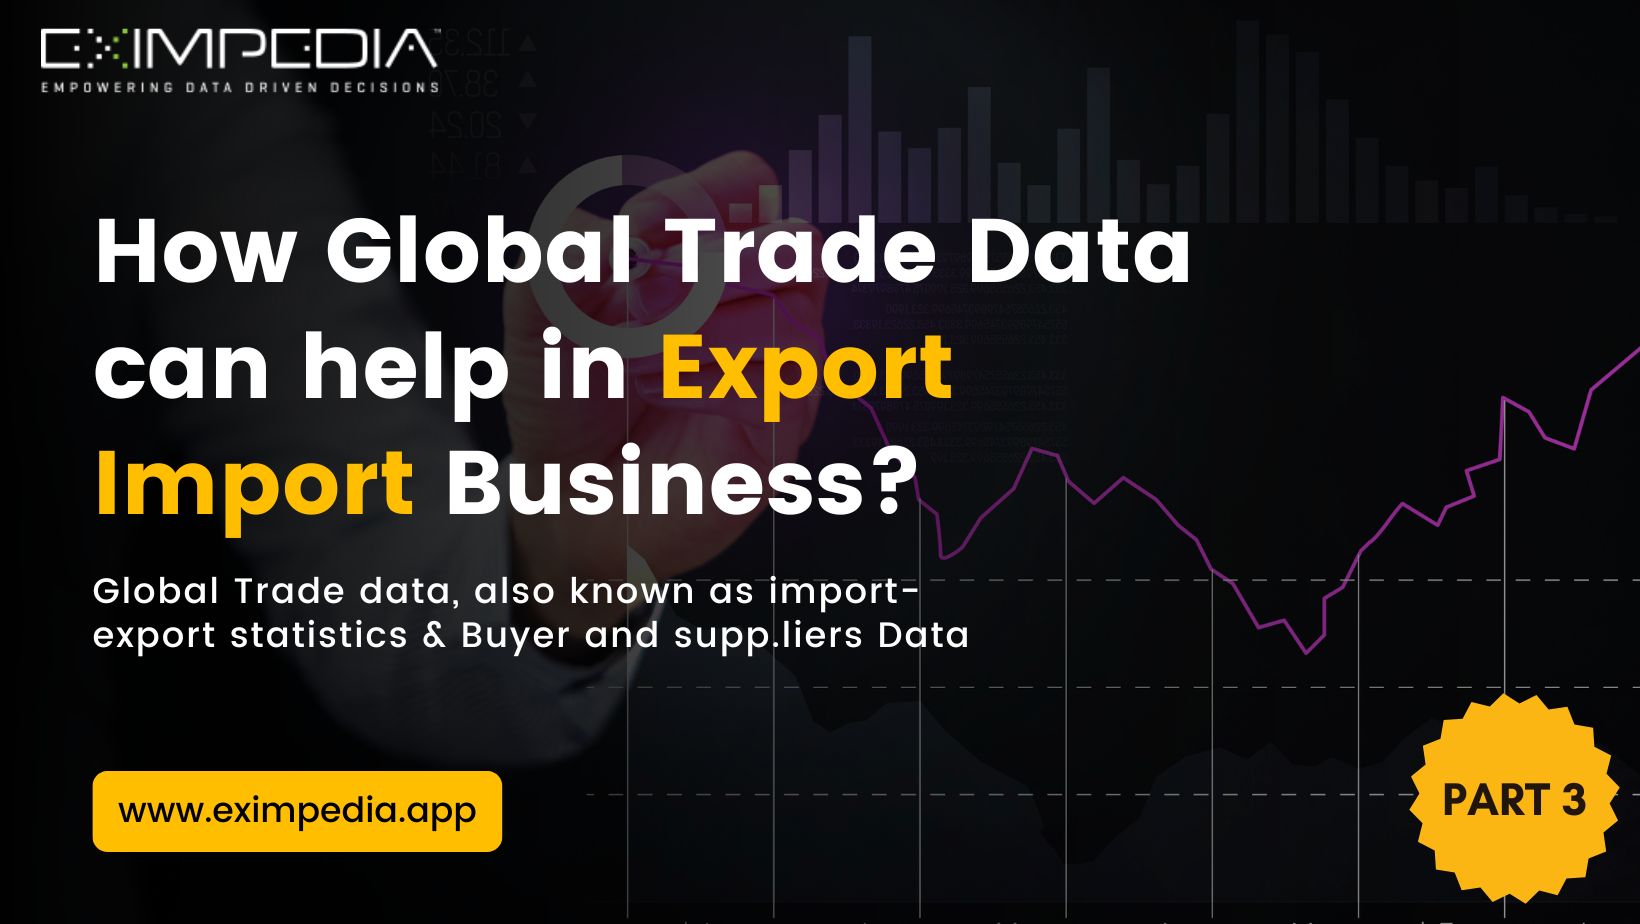 How Global Trade Data can help in Export Import Business?